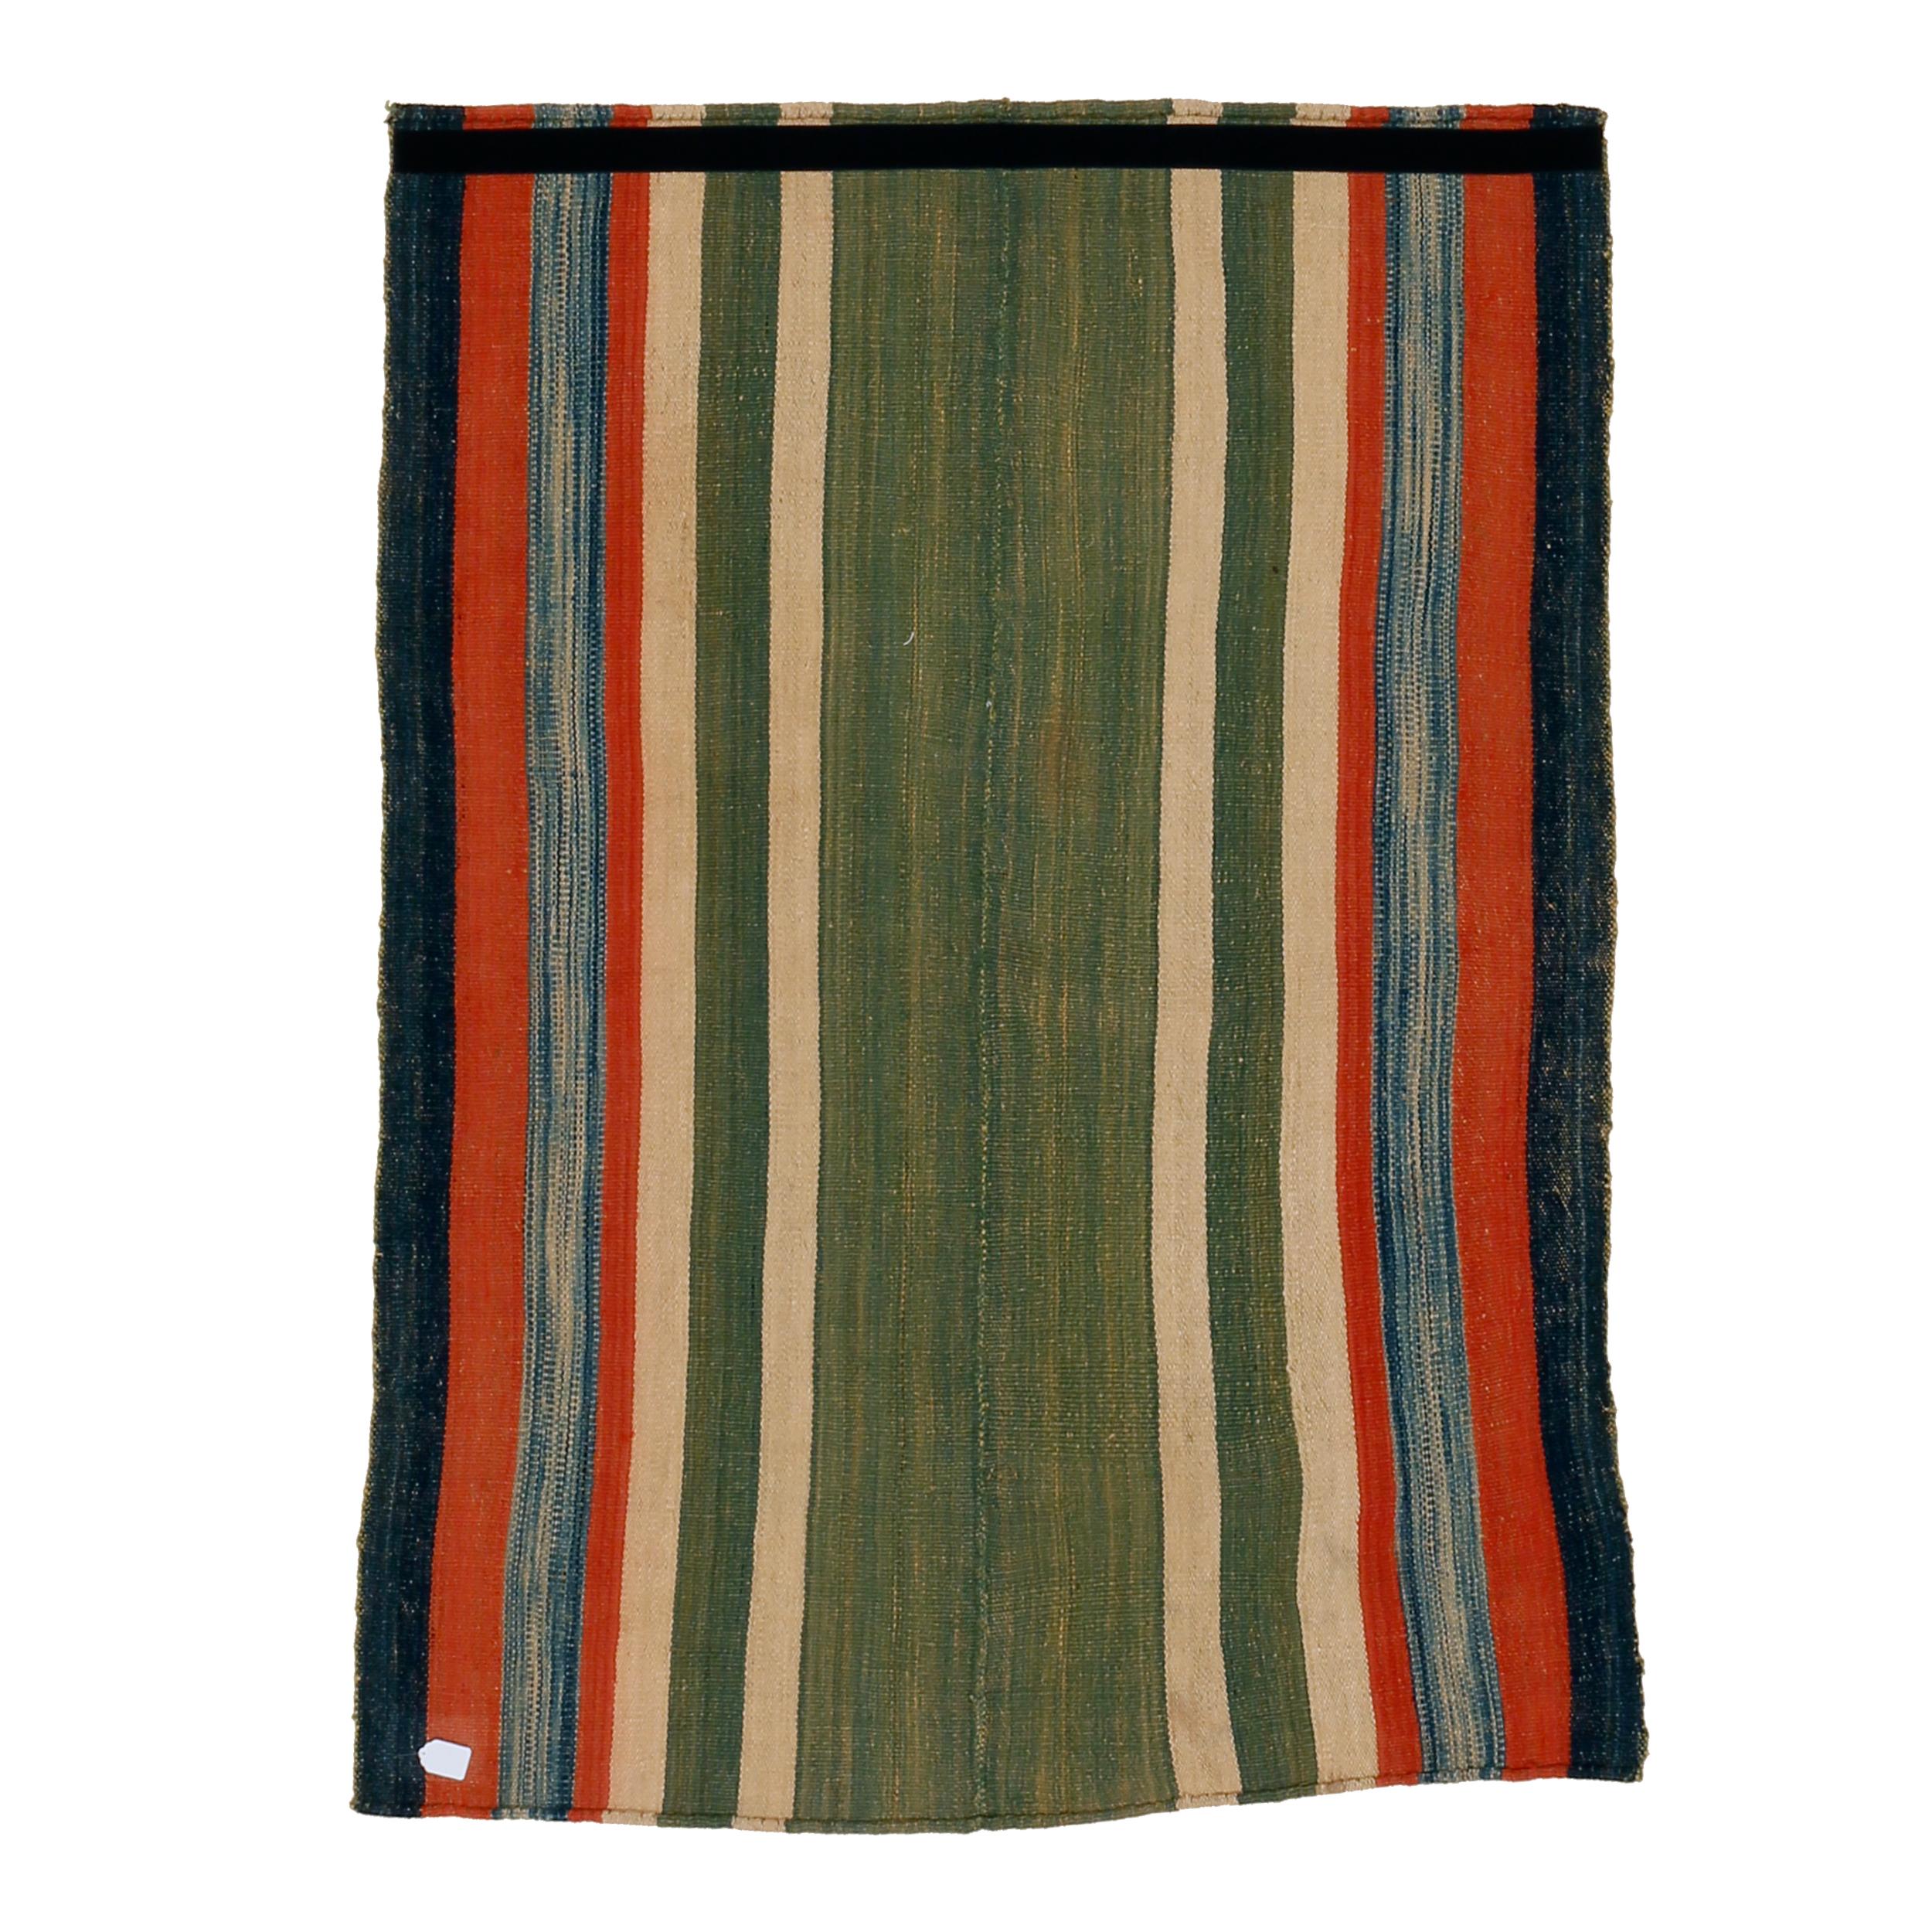 A very graphic tribal kilim composed of two joined panels each containing an array of polychrome vertical stripes of various widths. The result is a wool flat-weave with a mirror image pattern having a central stripe that is considerably wider than